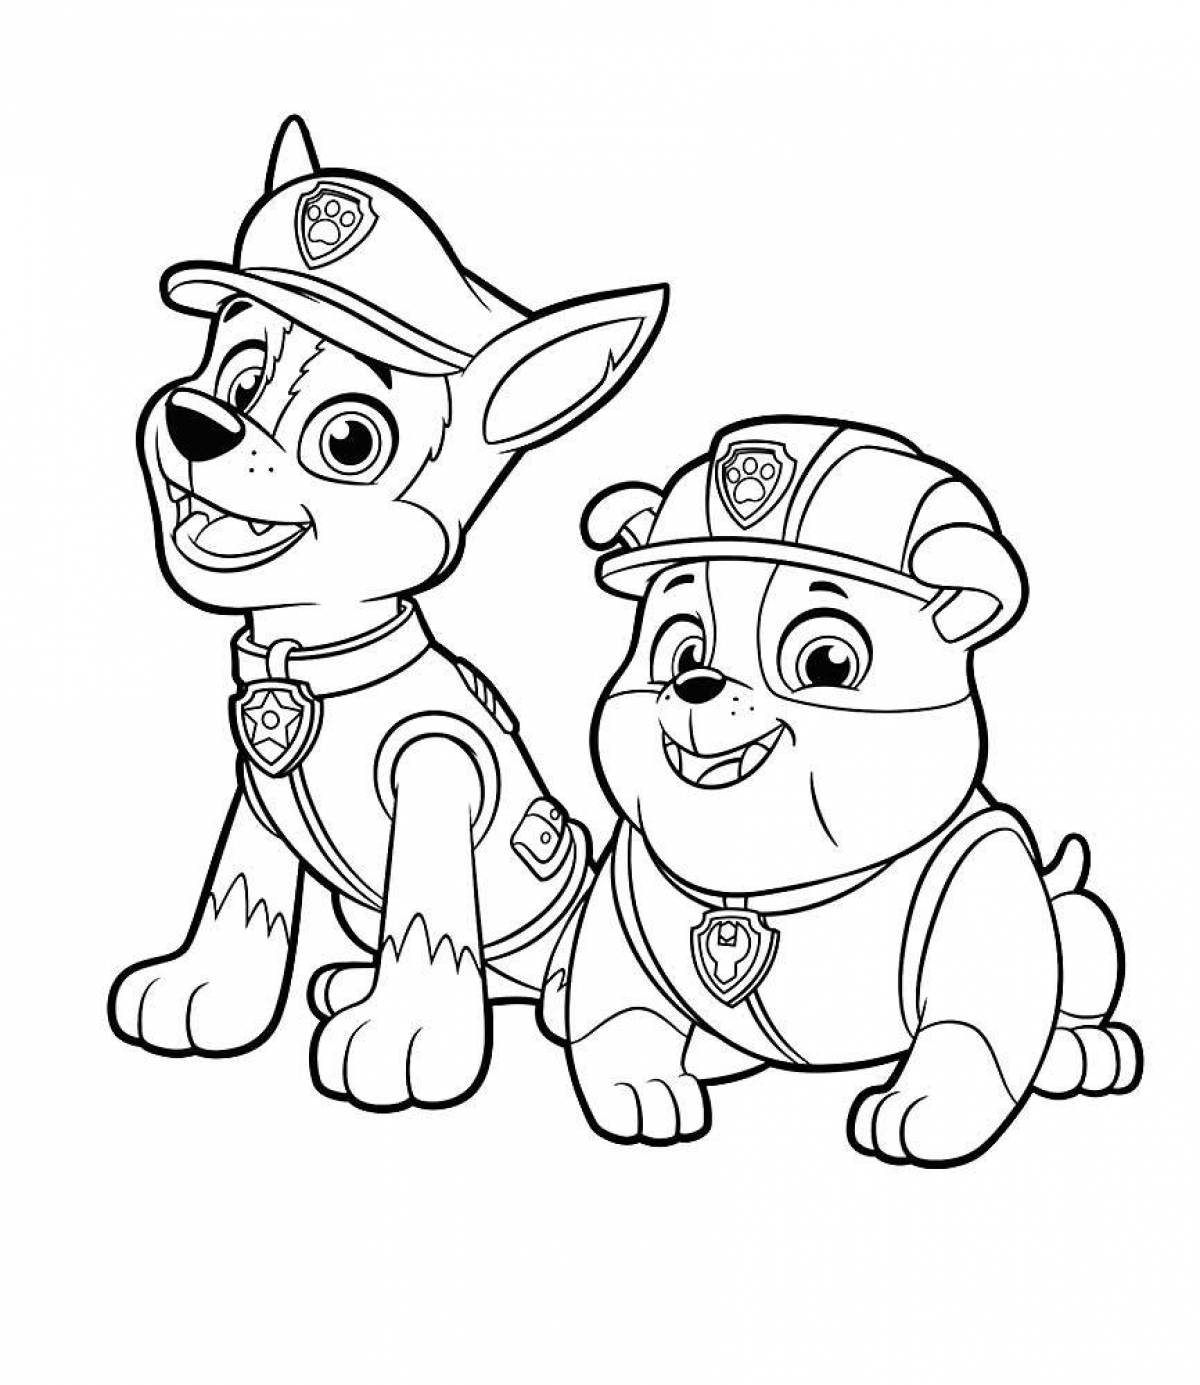 Paw Patrol playful coloring book for kids